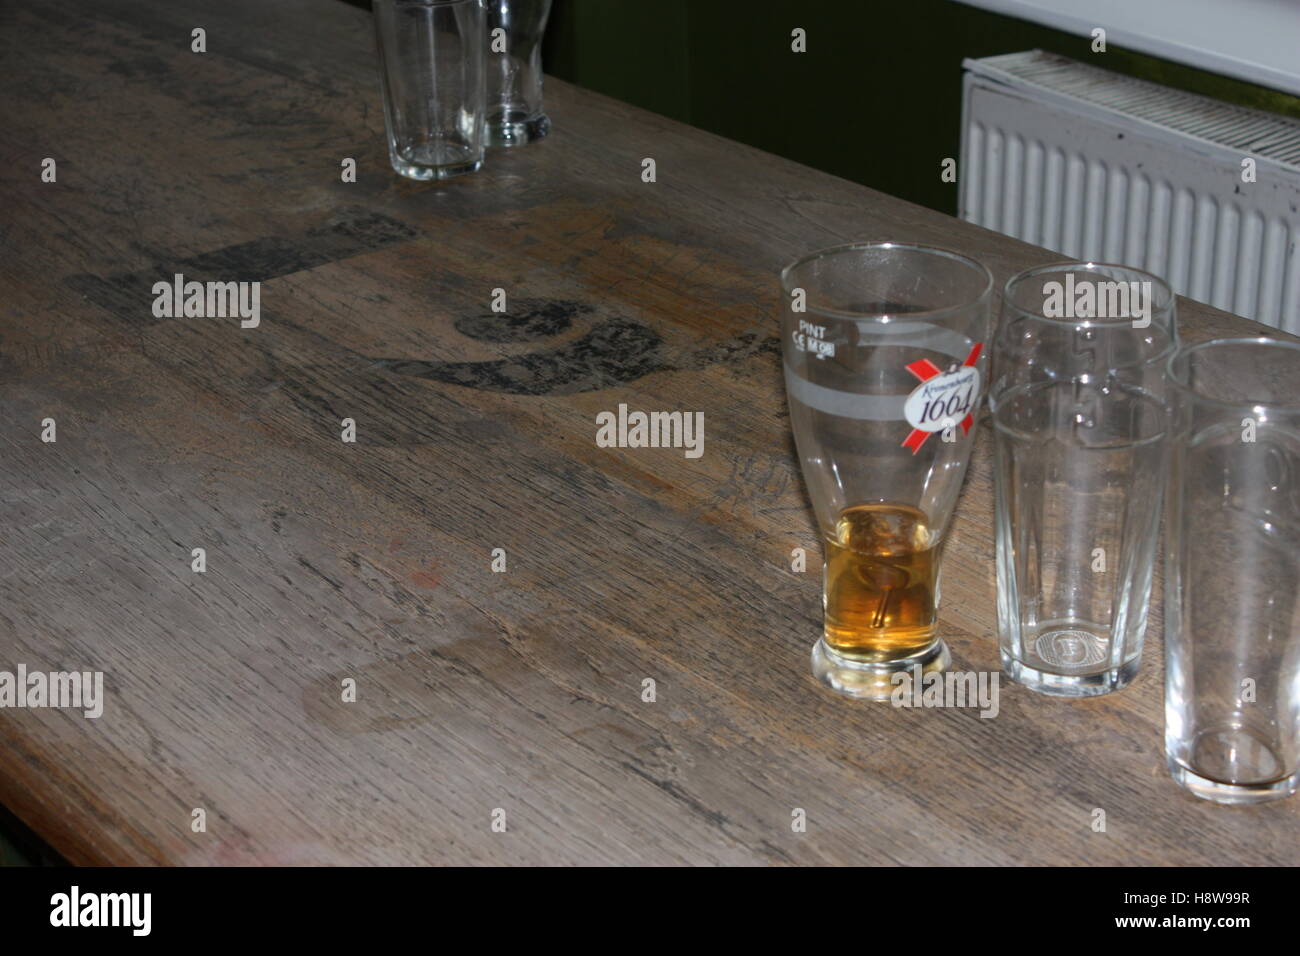 https://c8.alamy.com/comp/H8W99R/beer-glasses-on-an-old-wooden-rustic-table-in-a-london-bar-pub-alongside-H8W99R.jpg